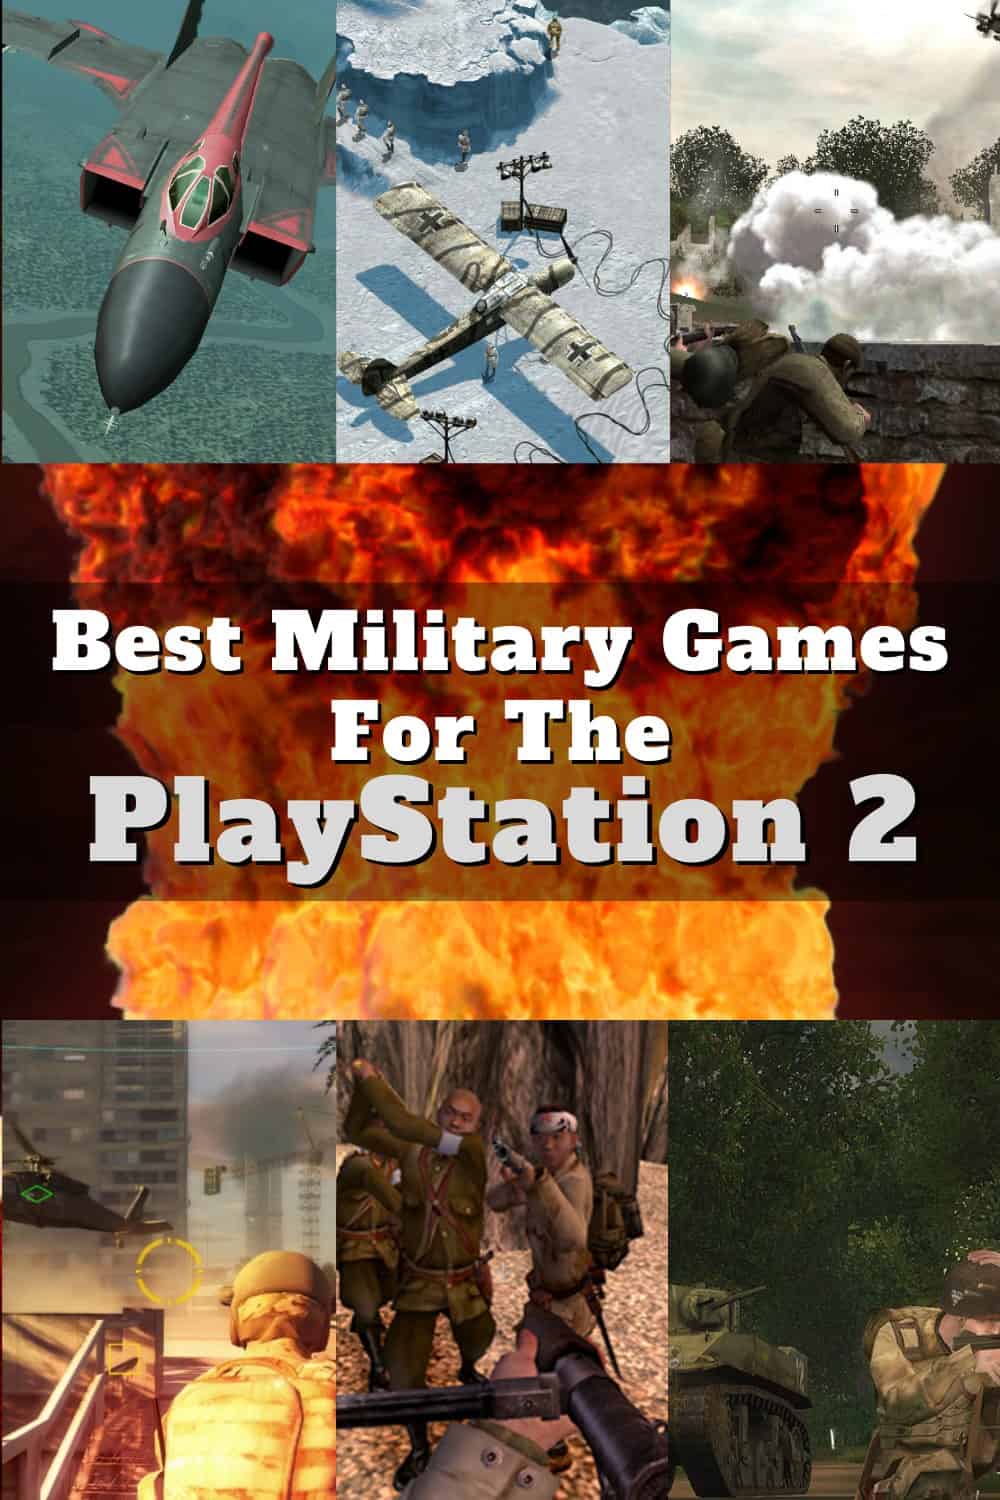 The Best War Game For The PS2